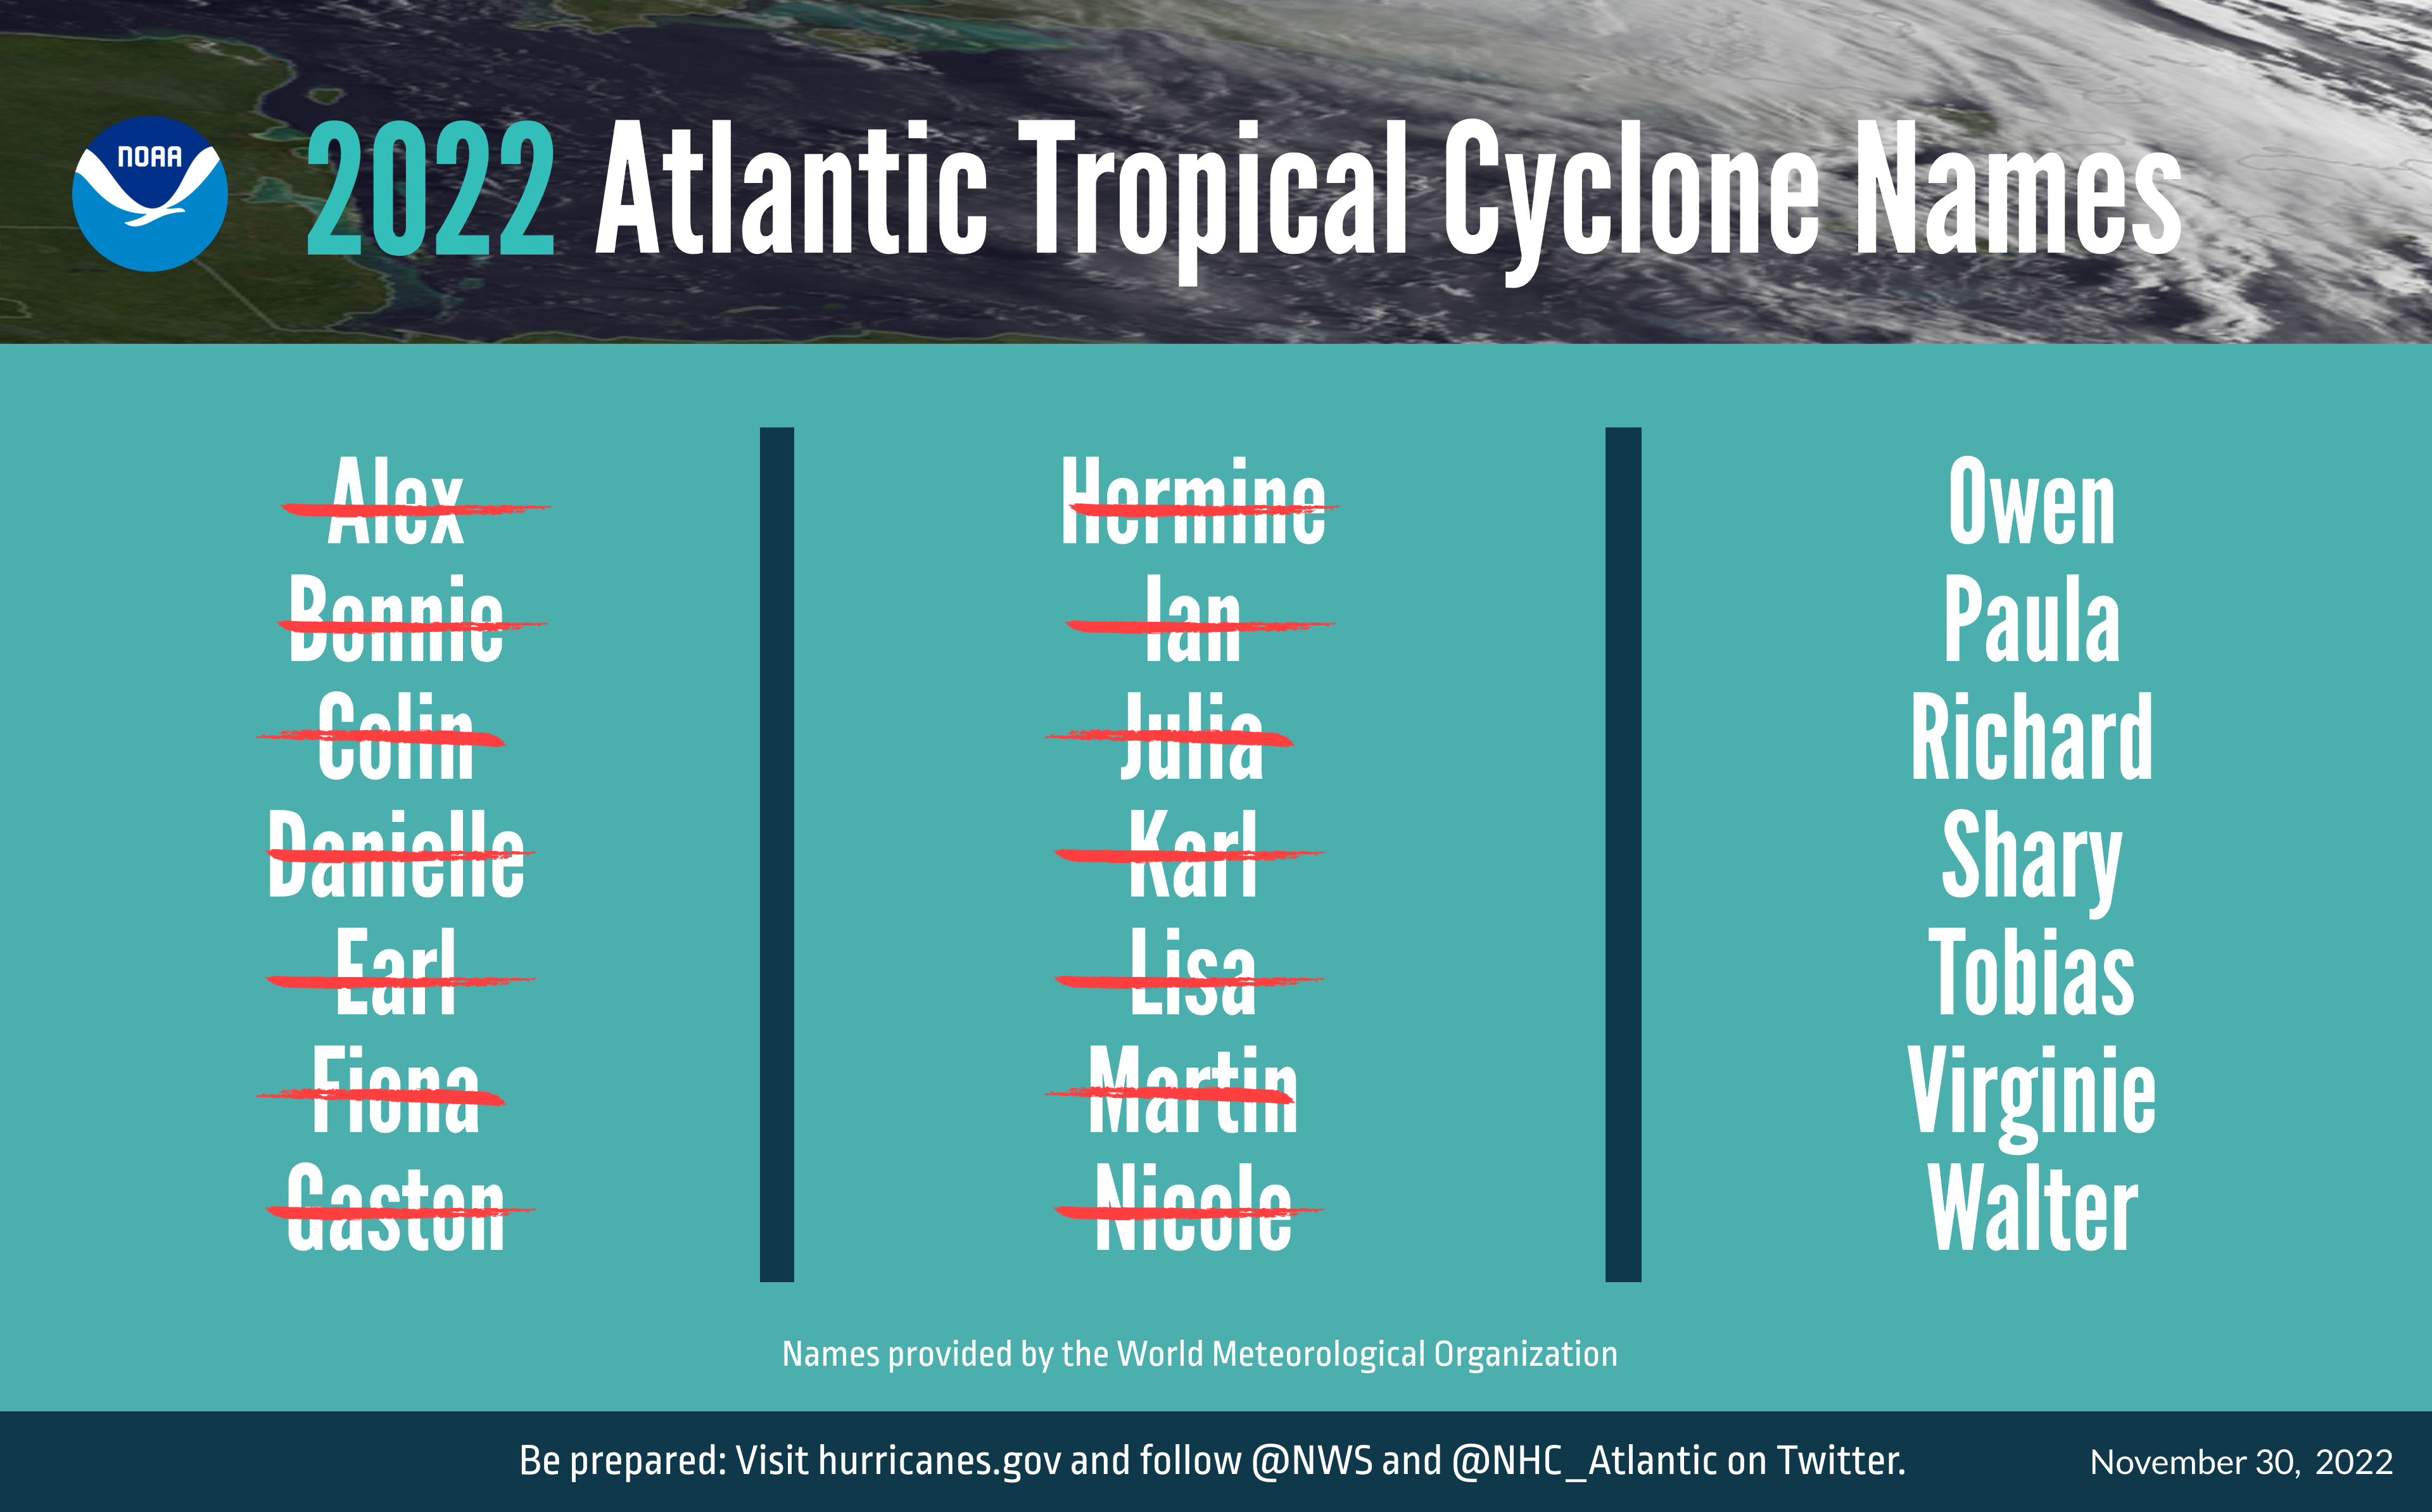 The list of 14 named storms that have occurred during the 2022 Atlantic Hurricane Season.